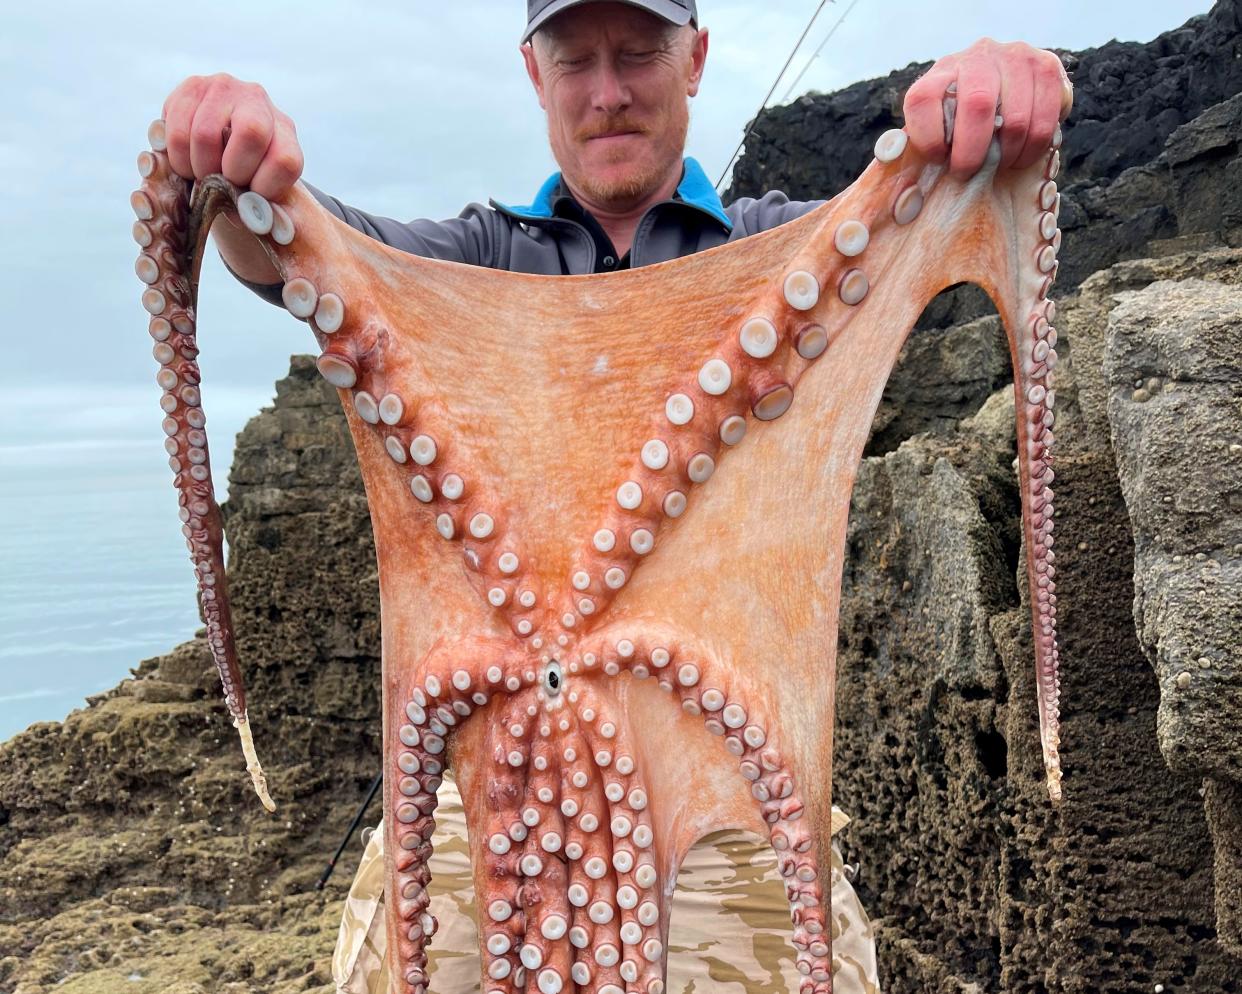 Ziggy Austin with the 7ft octopus at Hopes Nose near Torquay, Devon. (SWNS)